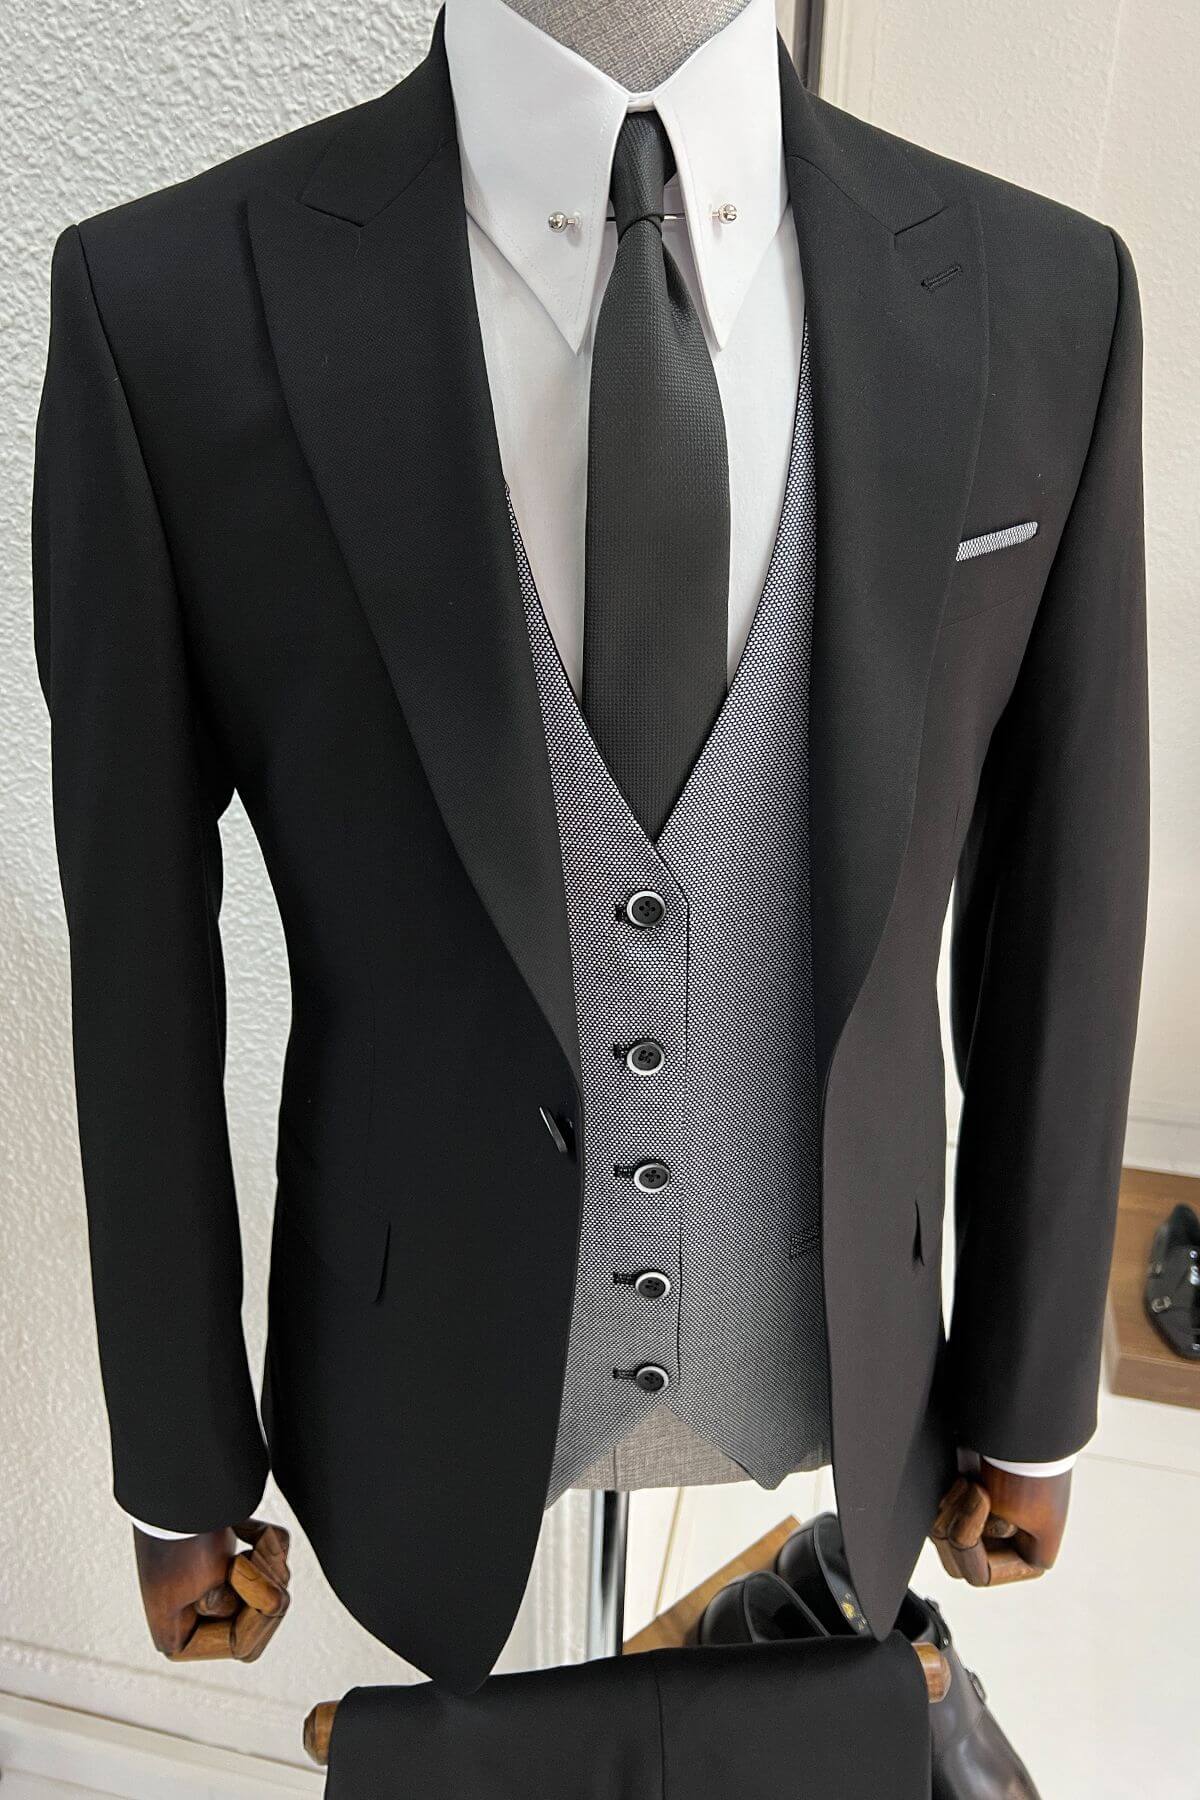 A Black and Gray Wool Suit on display 